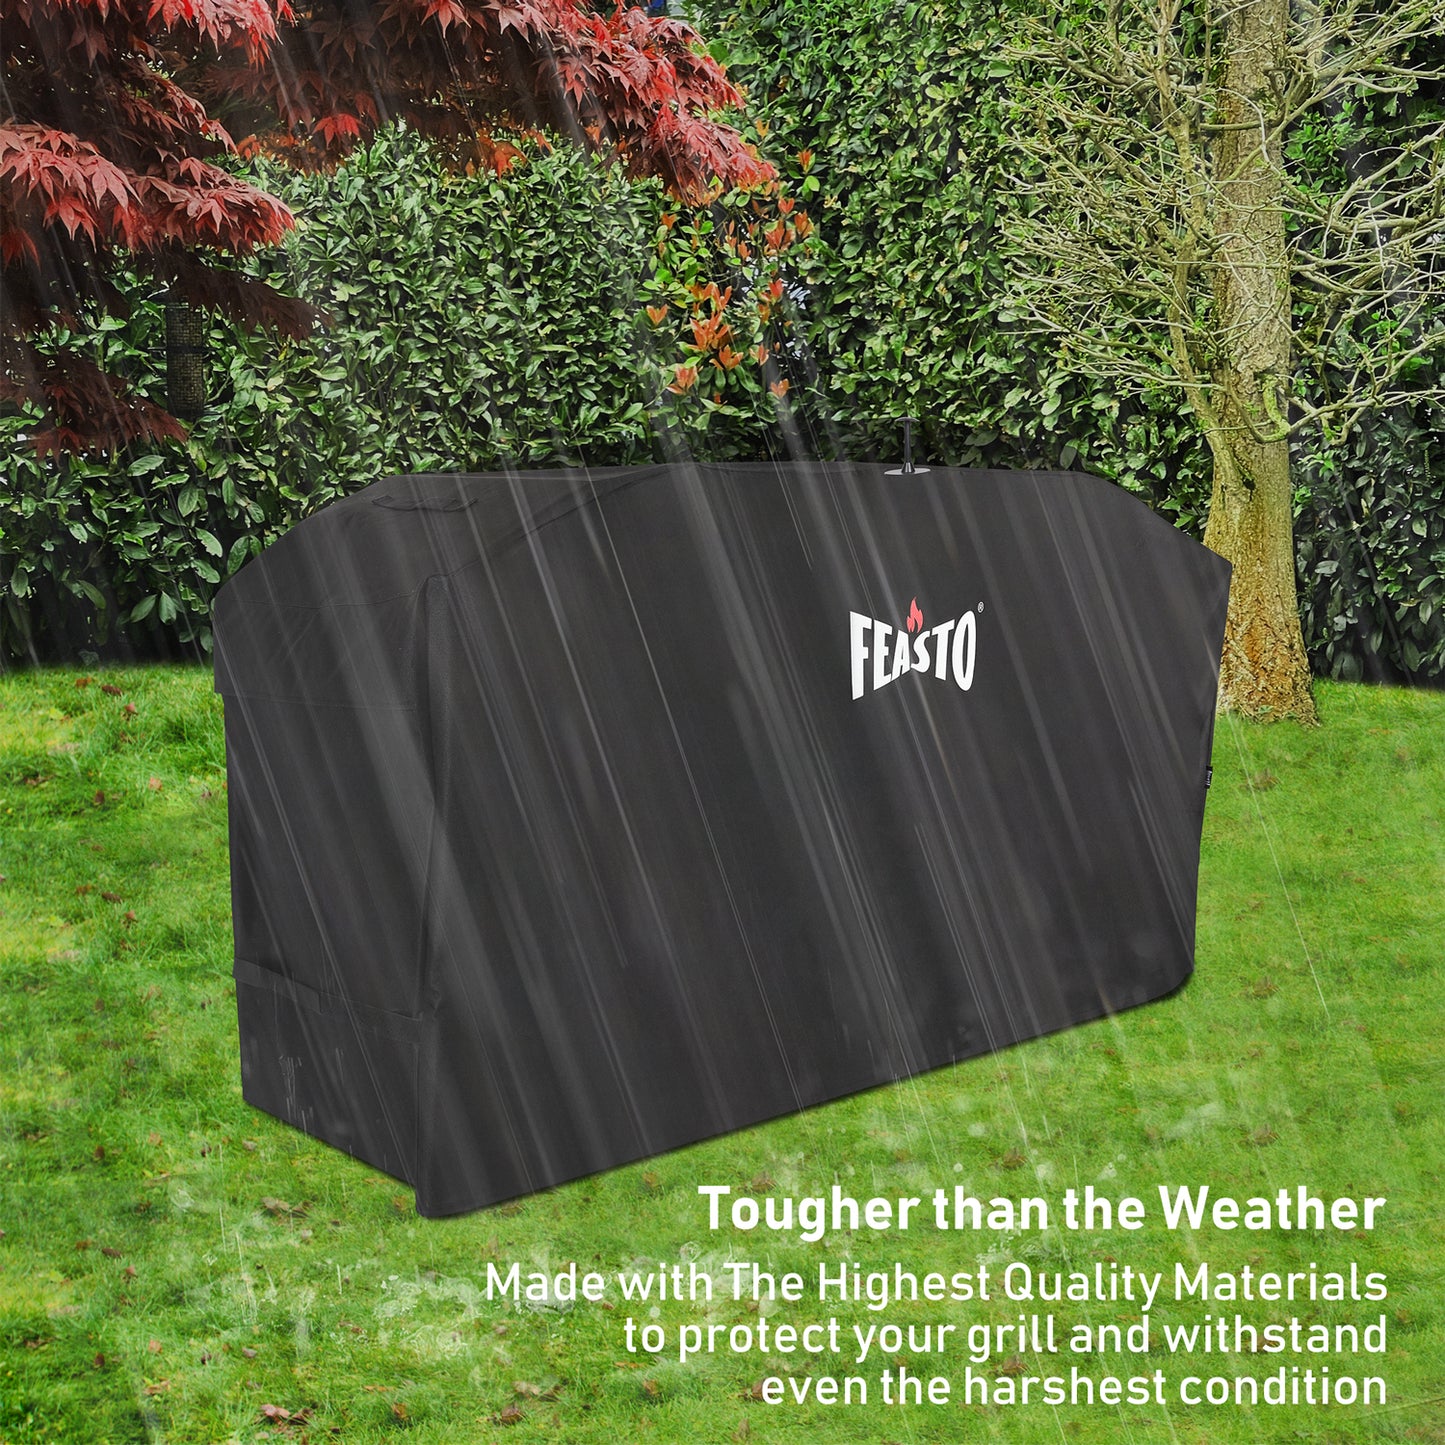 FEASTO Barbecue Grill Cover 66 inches Outdoor Waterproof Large Grill and Griddle Cover  Fits Weber Char-Boil Nexgrill and more(L66.5” x W22.5” x H35”) Includes Plastic Support Pole